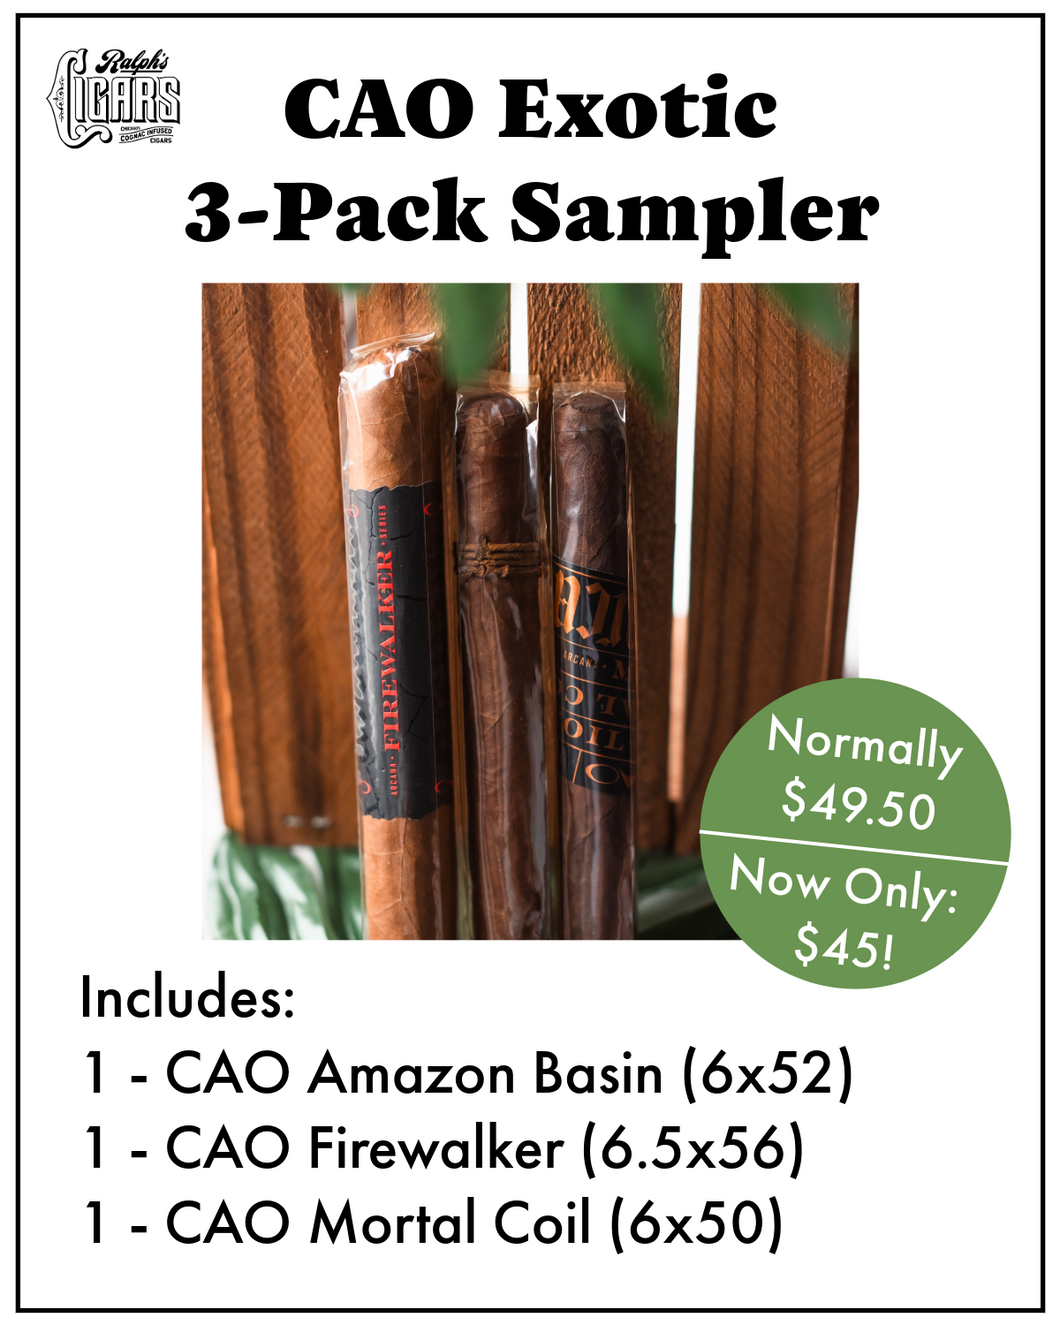 CAO Exotic 3-Pack